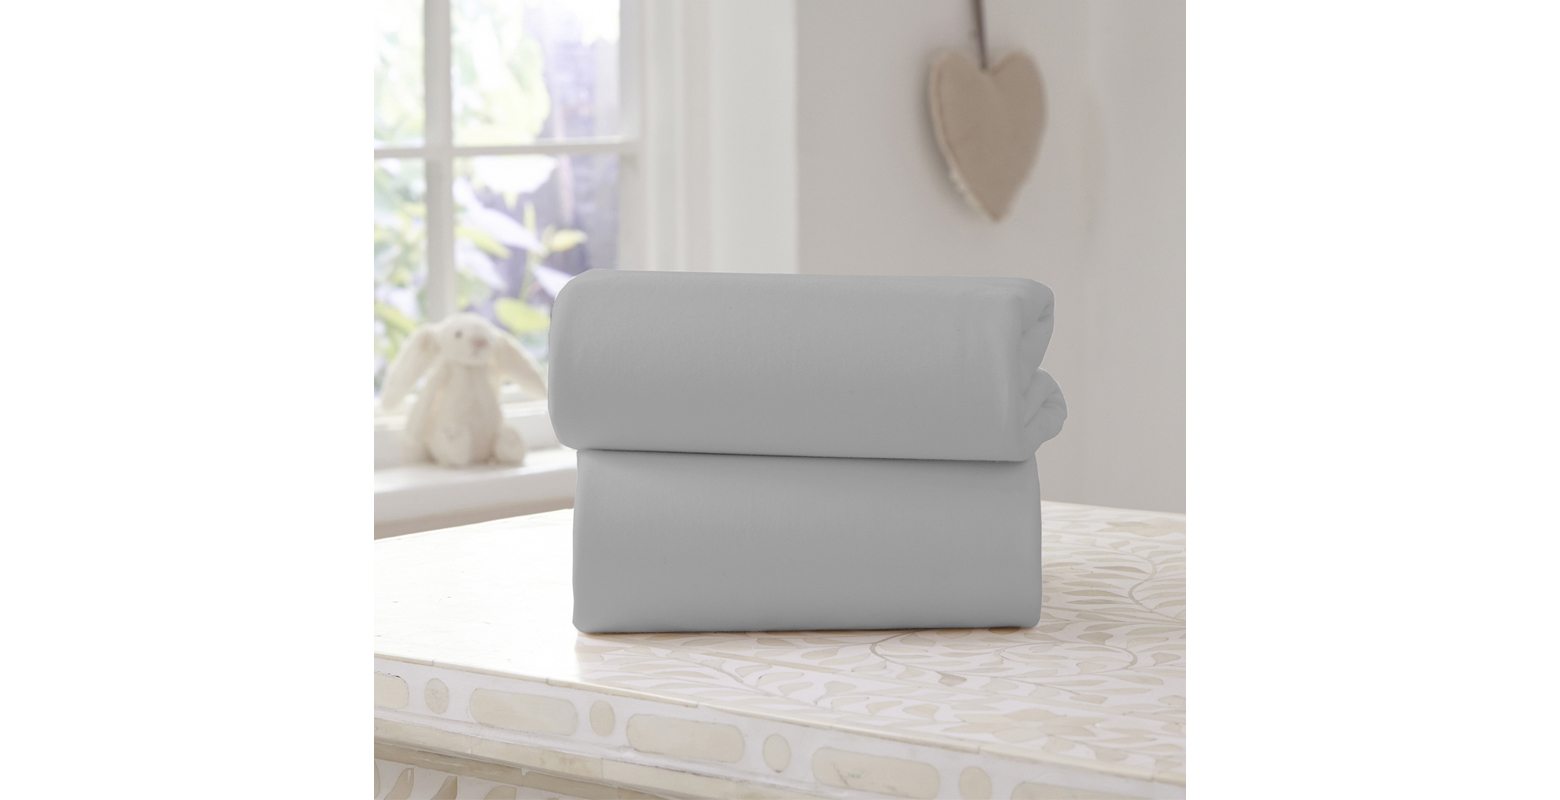 Clair De Lune Fitted Sheet Twin Pack Grey Cot